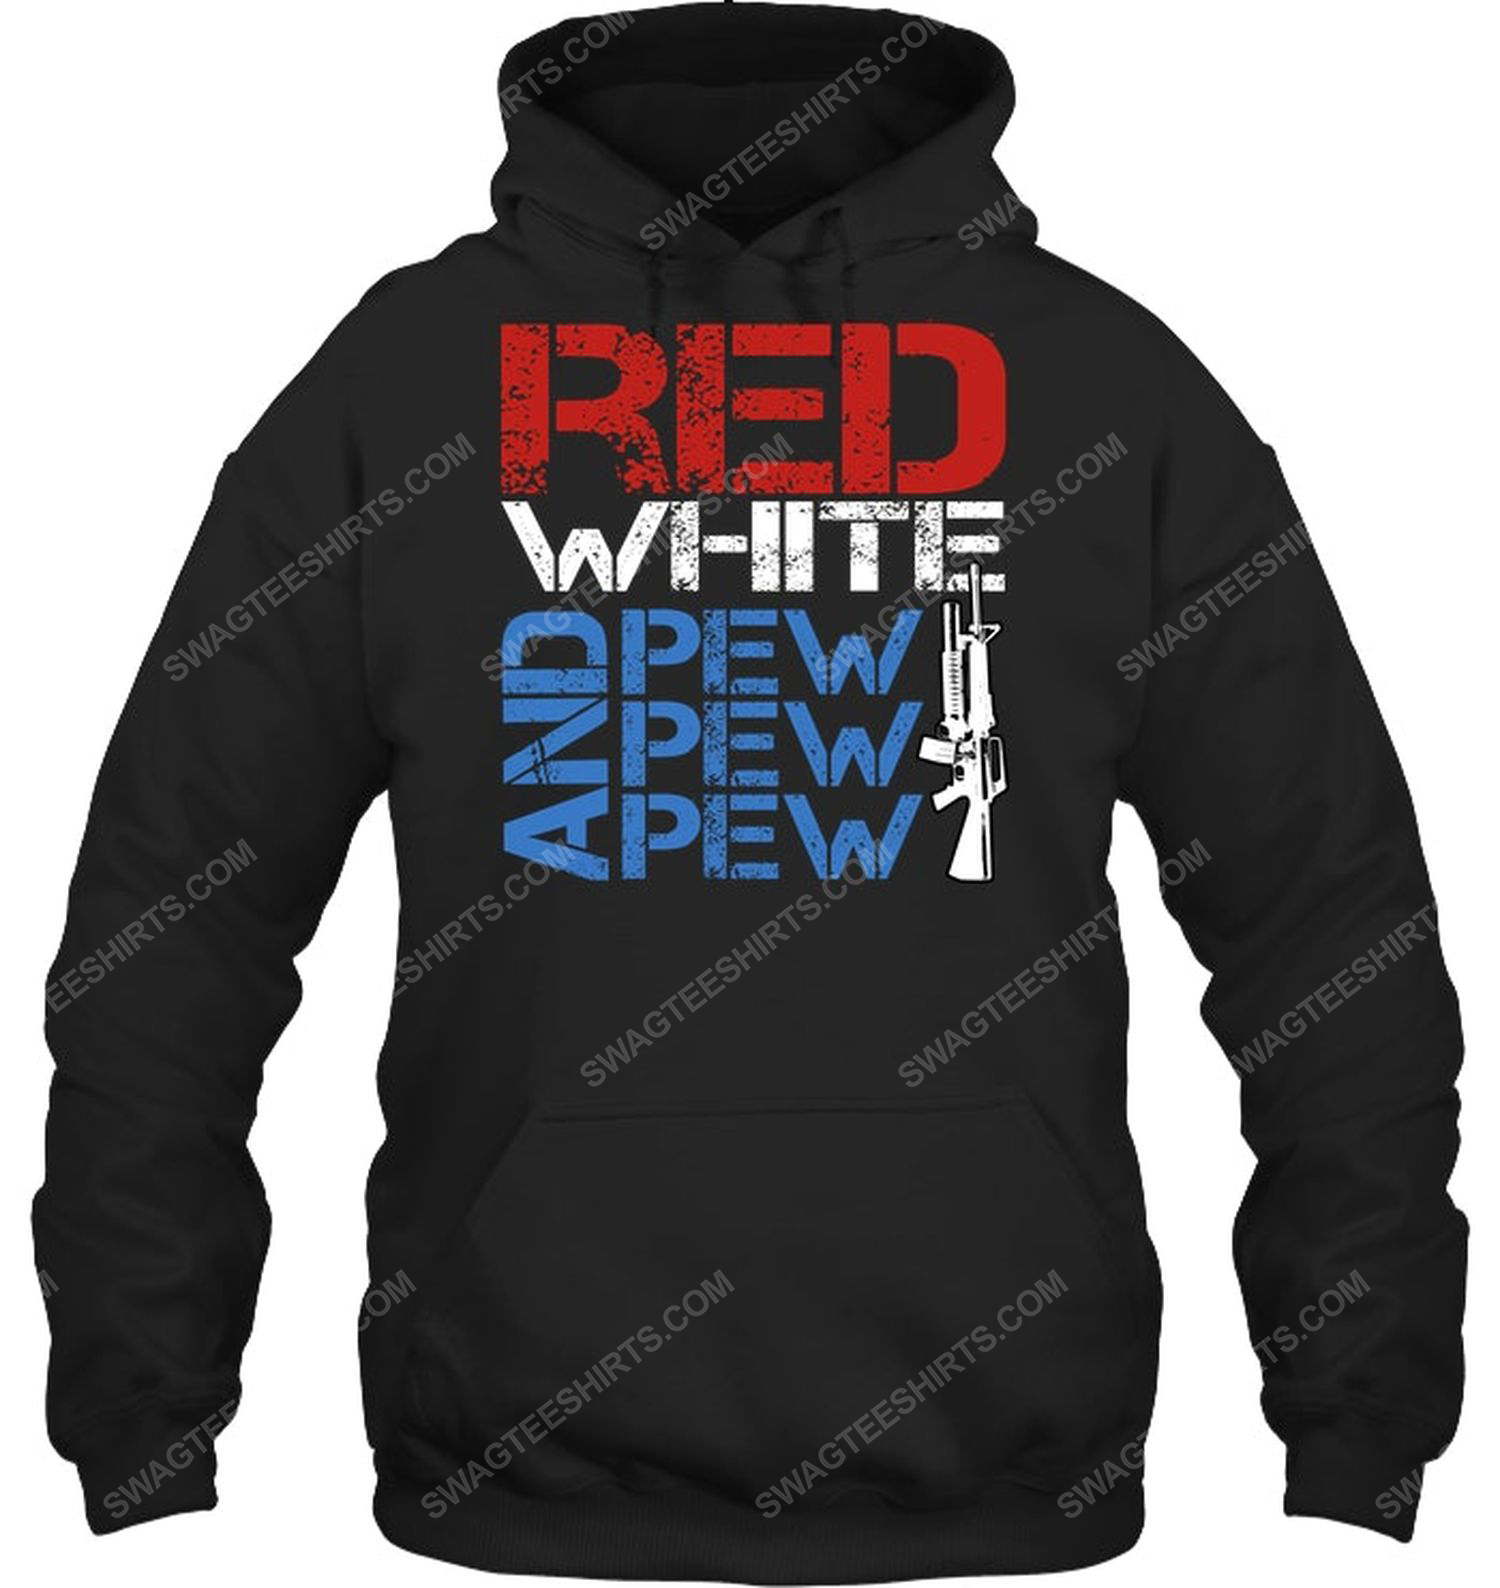 Red white and pew pew pew gun political hoodie